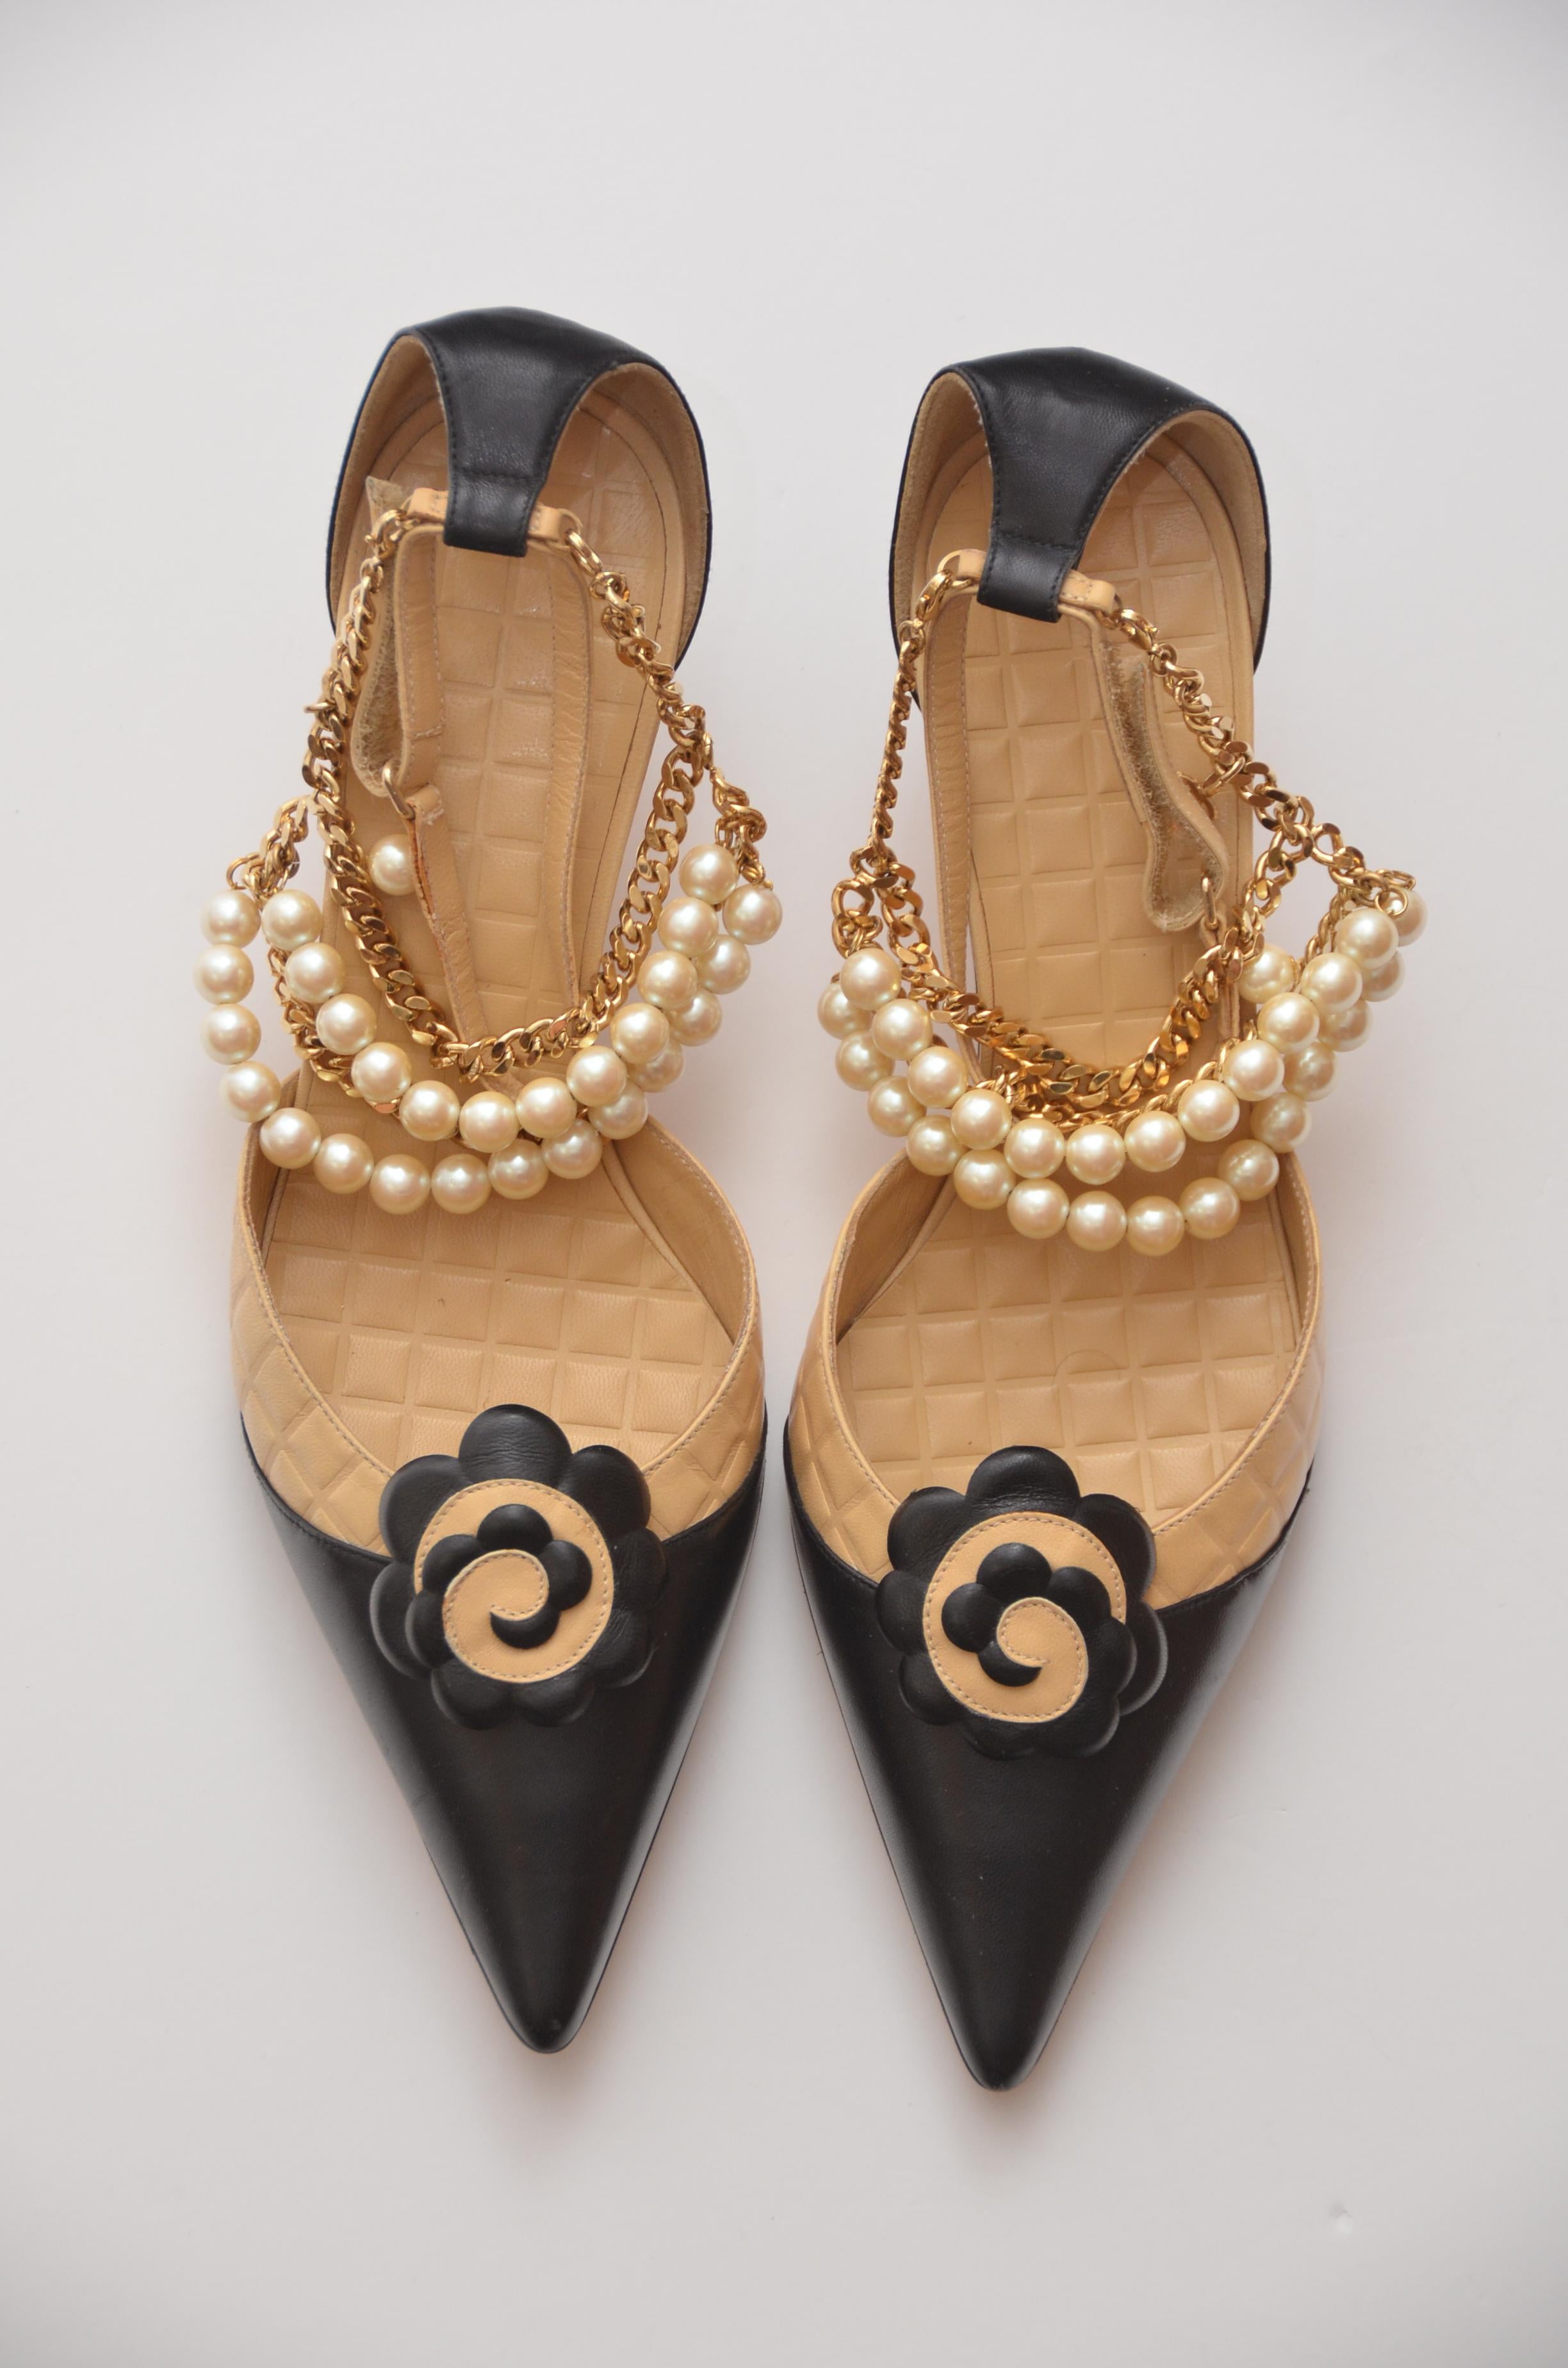 Chanel camellia kitten hill shoes with removable gold tone chain ,pearls and mini CC on the chain.
Condition is mint, never used with some minor flaws from storage.
Chain with pearls is removable as well as camellia flower on the front.
Hill is